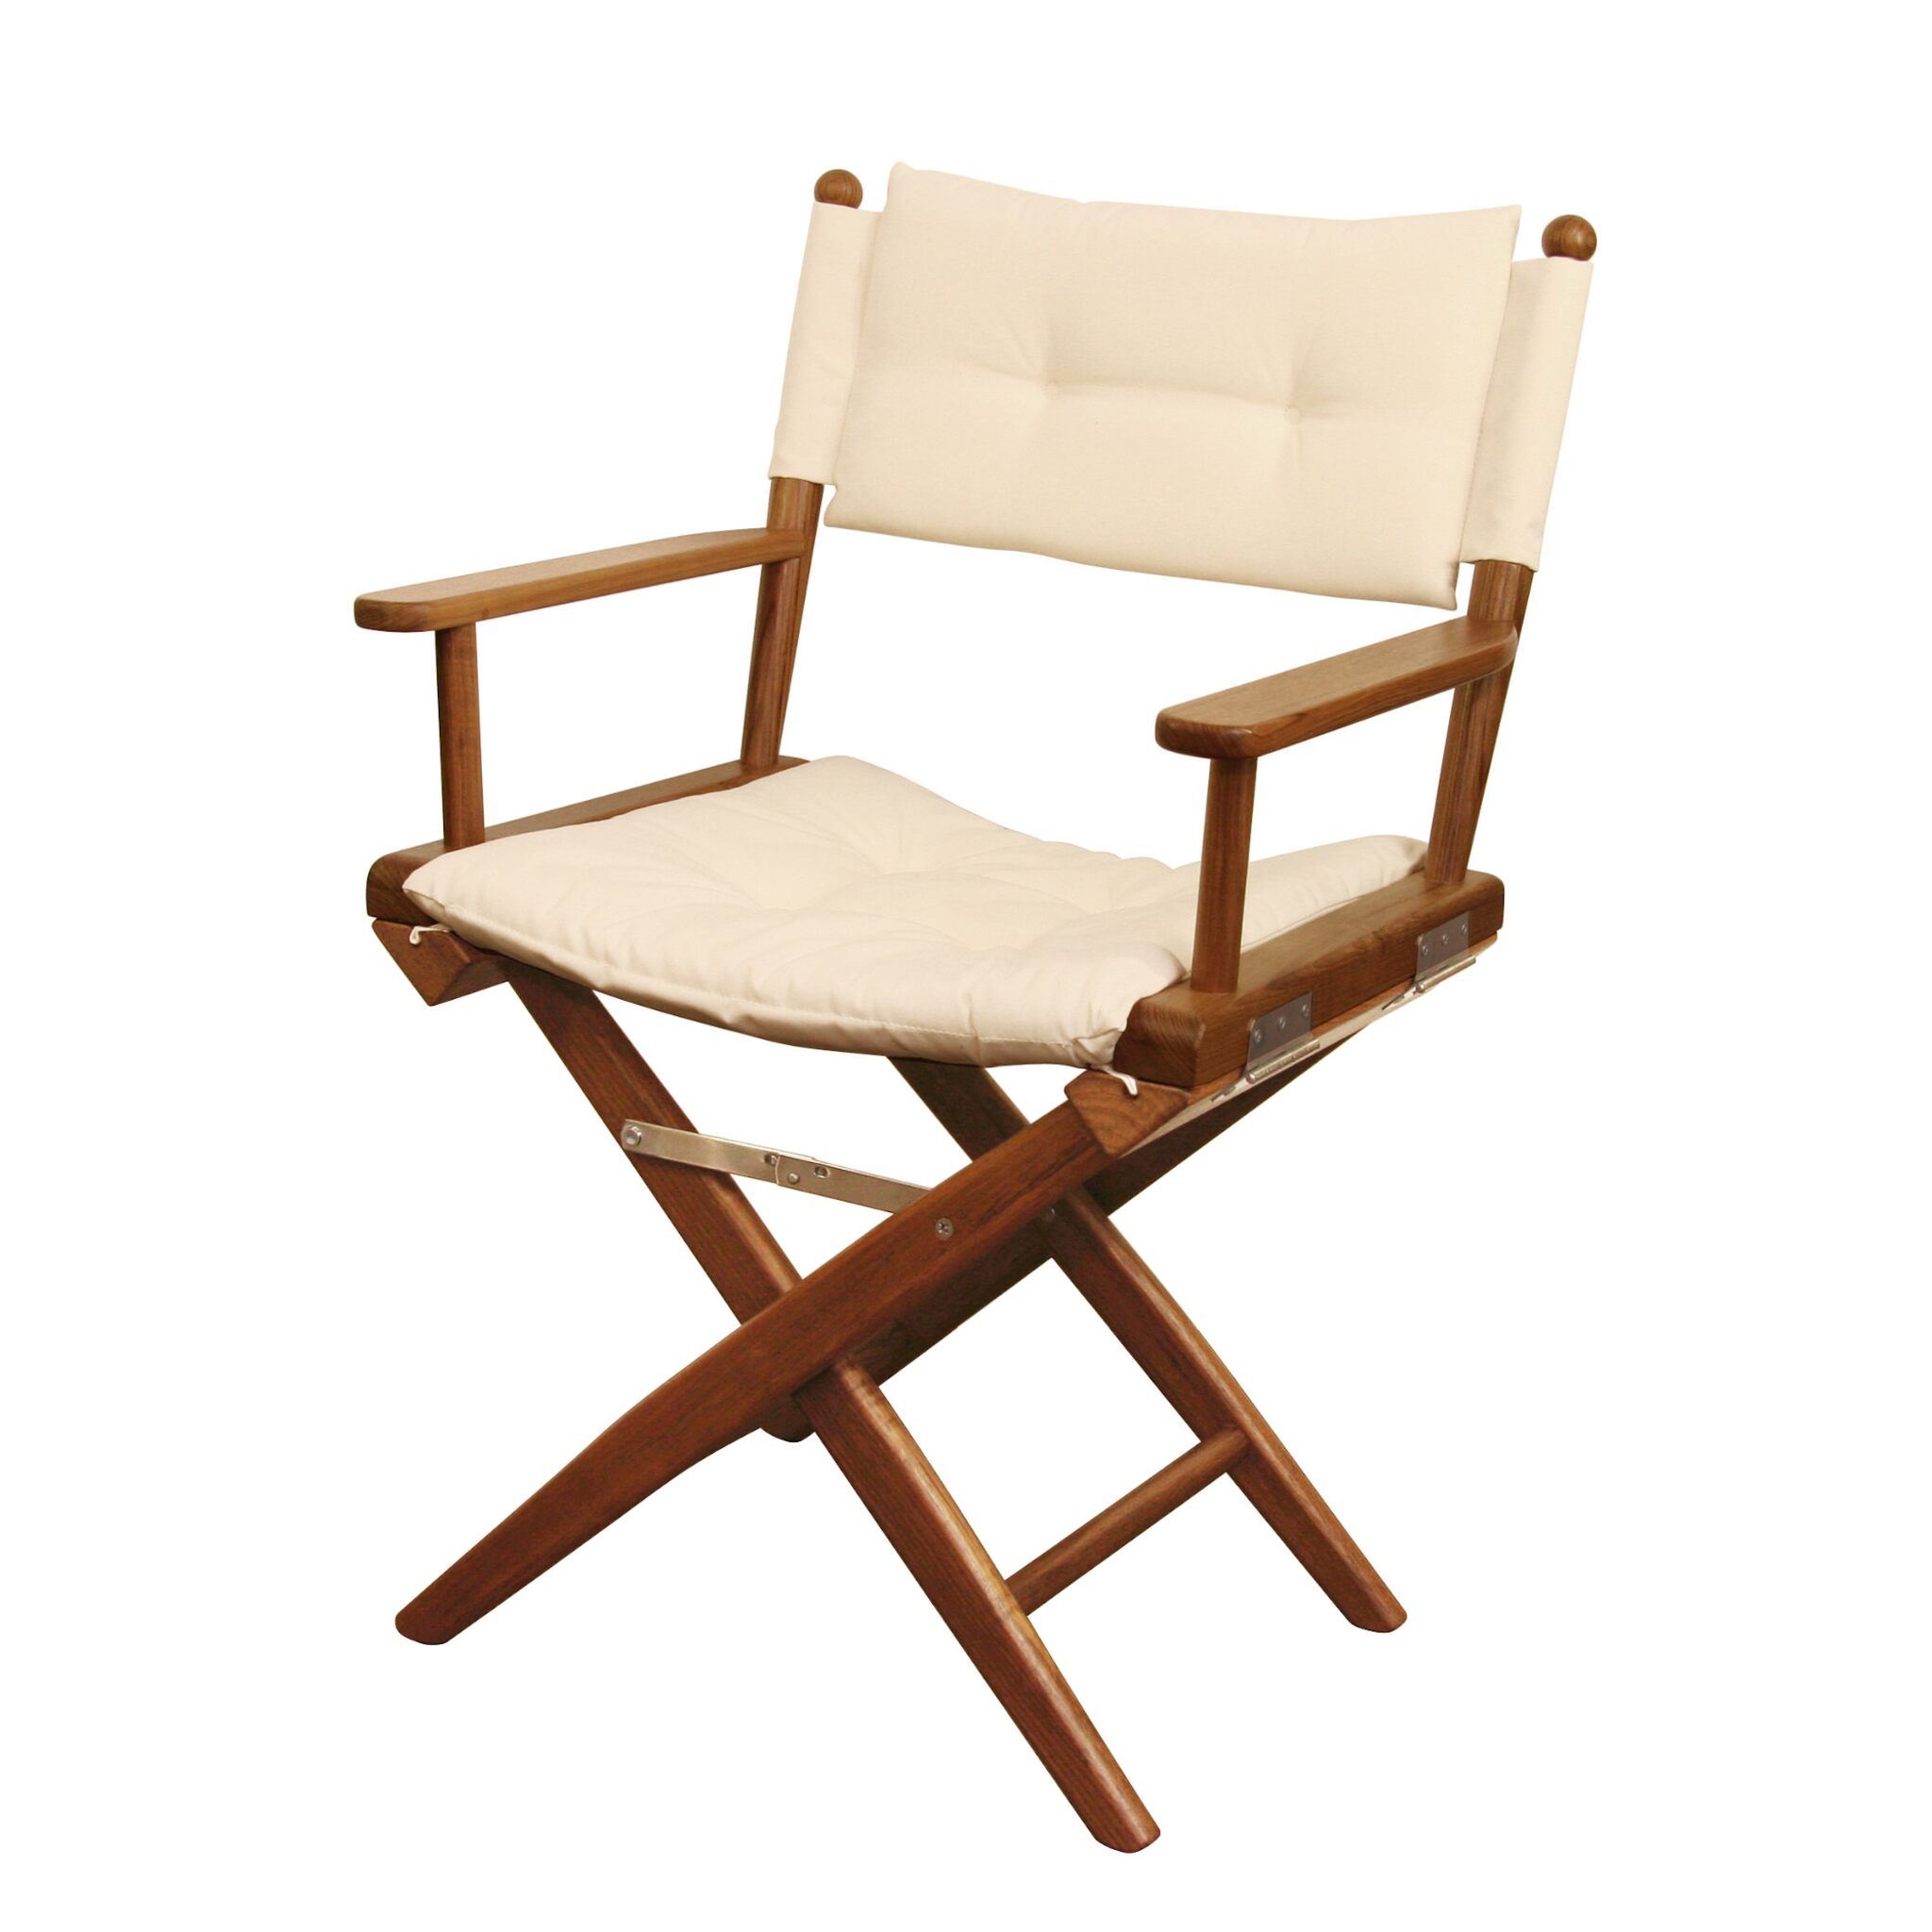 ARC boat chair DeLuxe collapsible